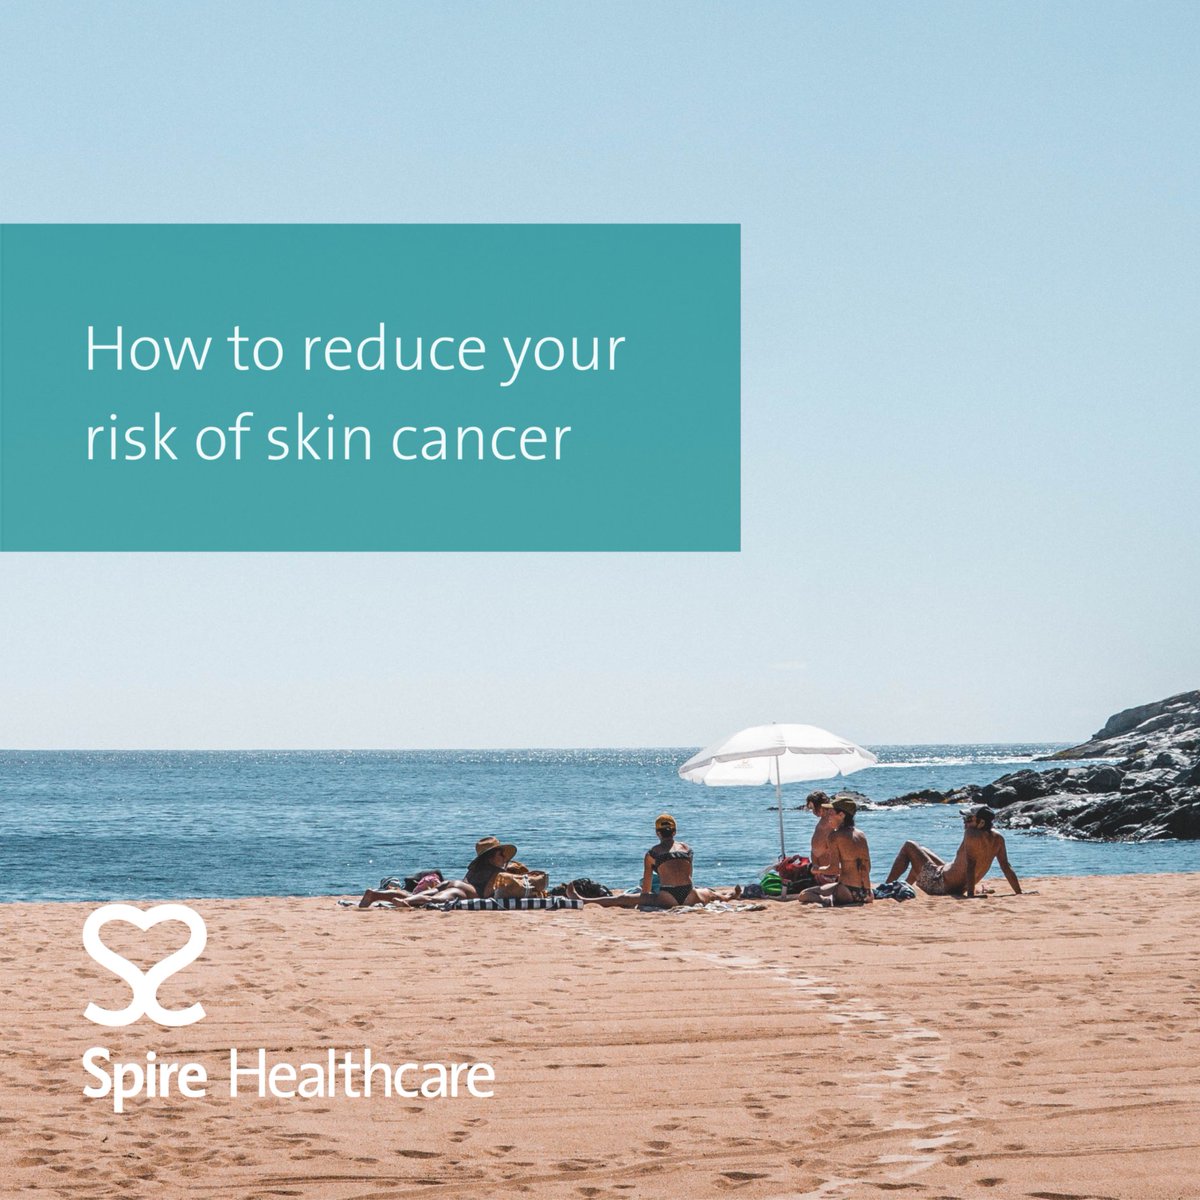 Here comes the sun ☀️ 

This Sun Awareness Week we're looking at ways to help you reduce your risk of skin cancer ➡️ spkl.io/60194NaGN

#SunAwarenessWeek #SkinCancerAwareness